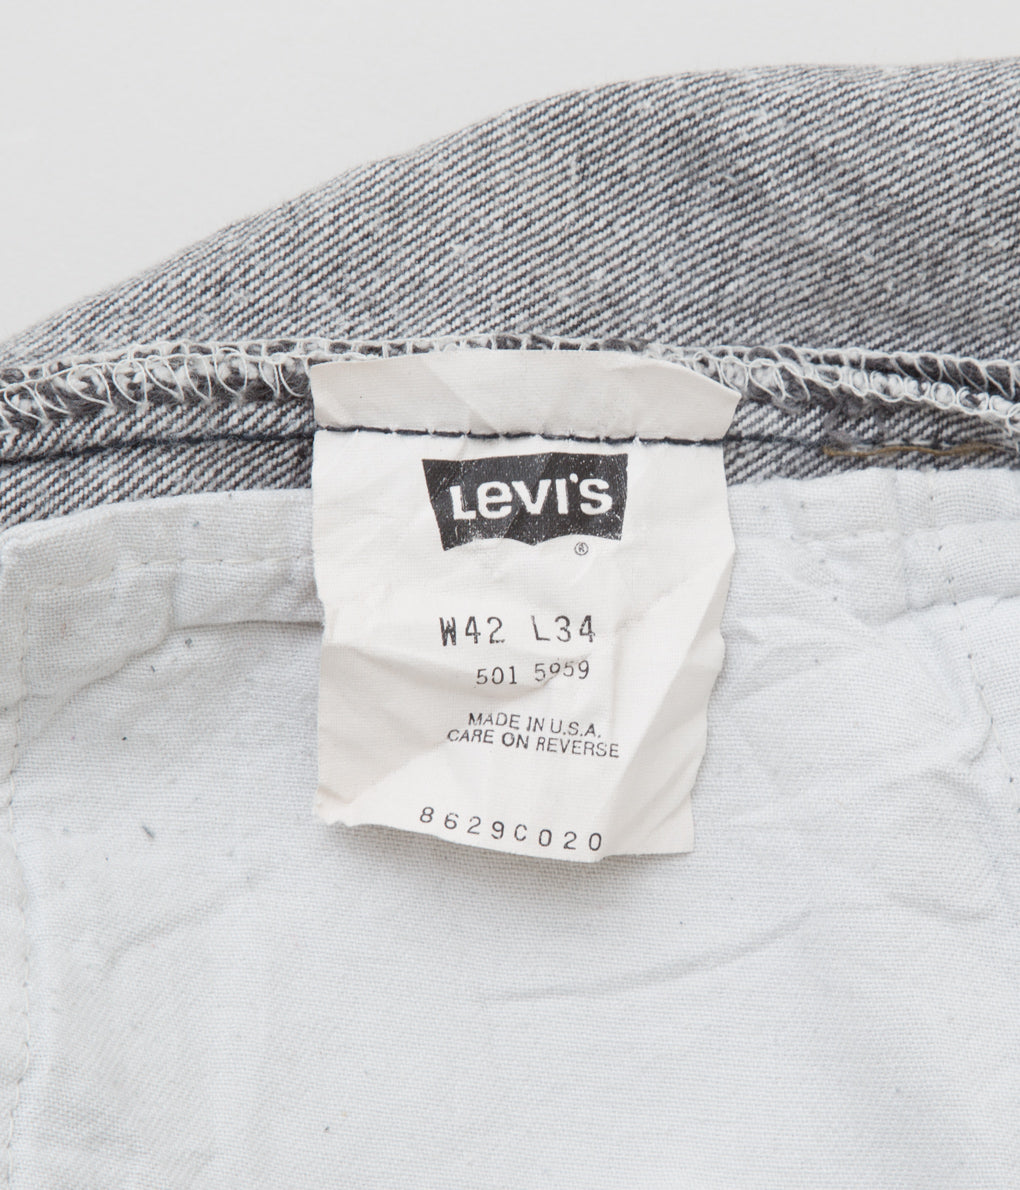 VINTAGE "90's LEVI‘S 501 BLACK MADE IN USA "(W42/L34)